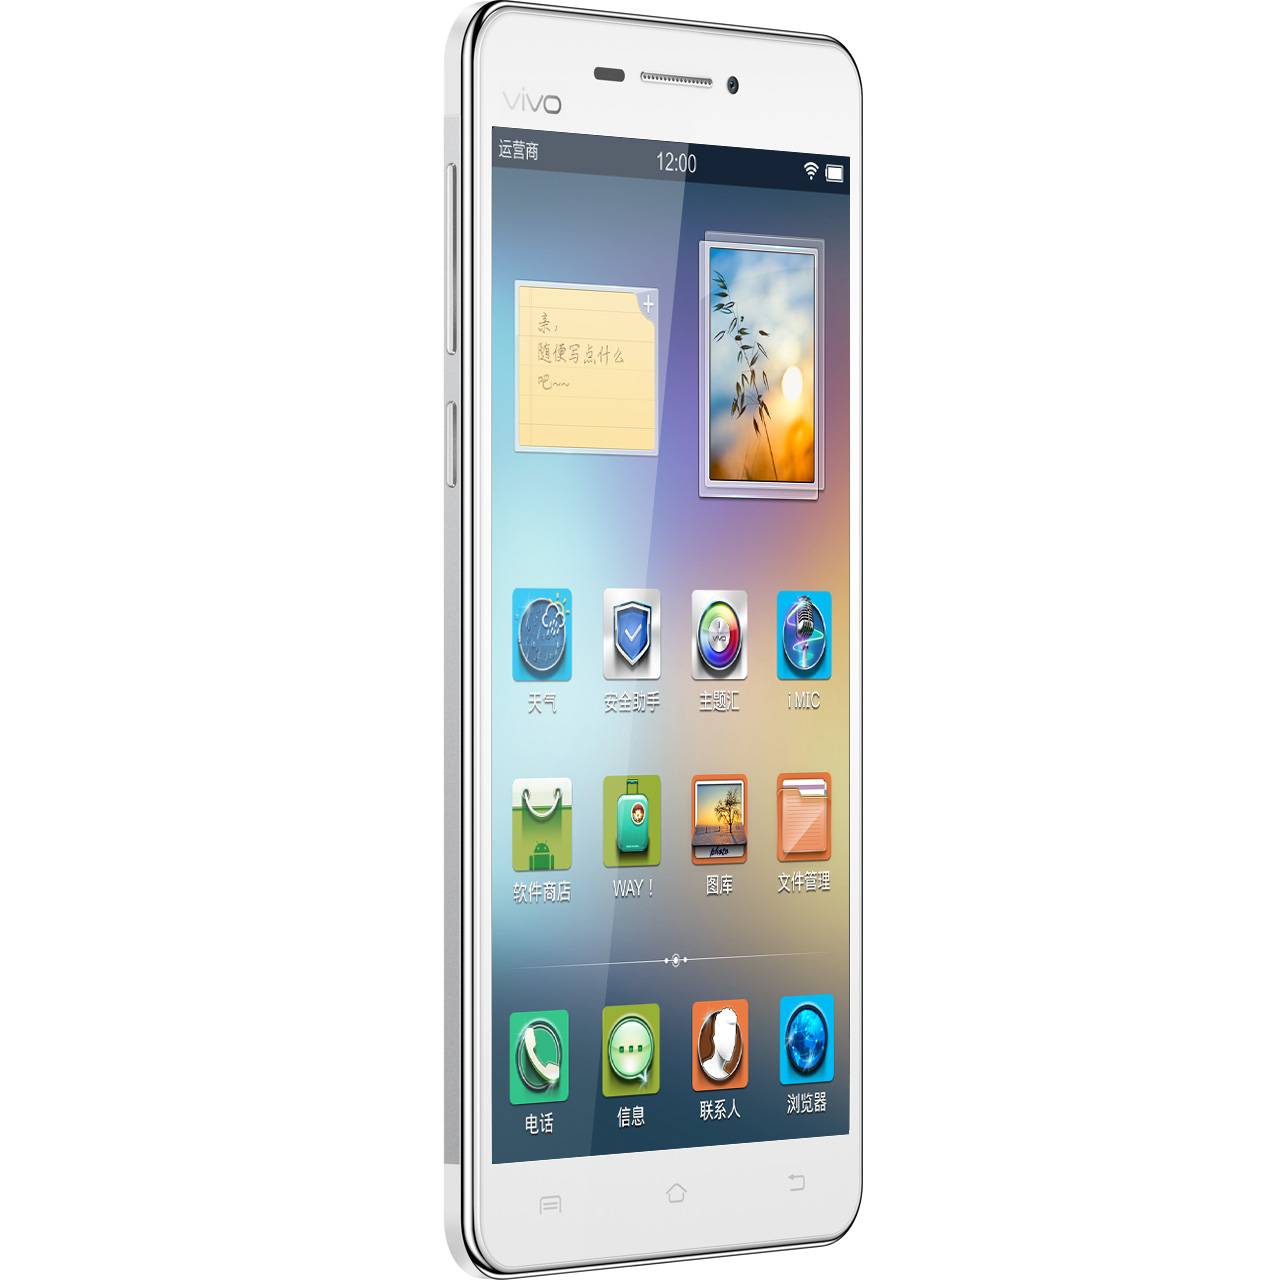 Vivo X3 is here, world’s thinnest phone so far - Android Community1280 x 1280